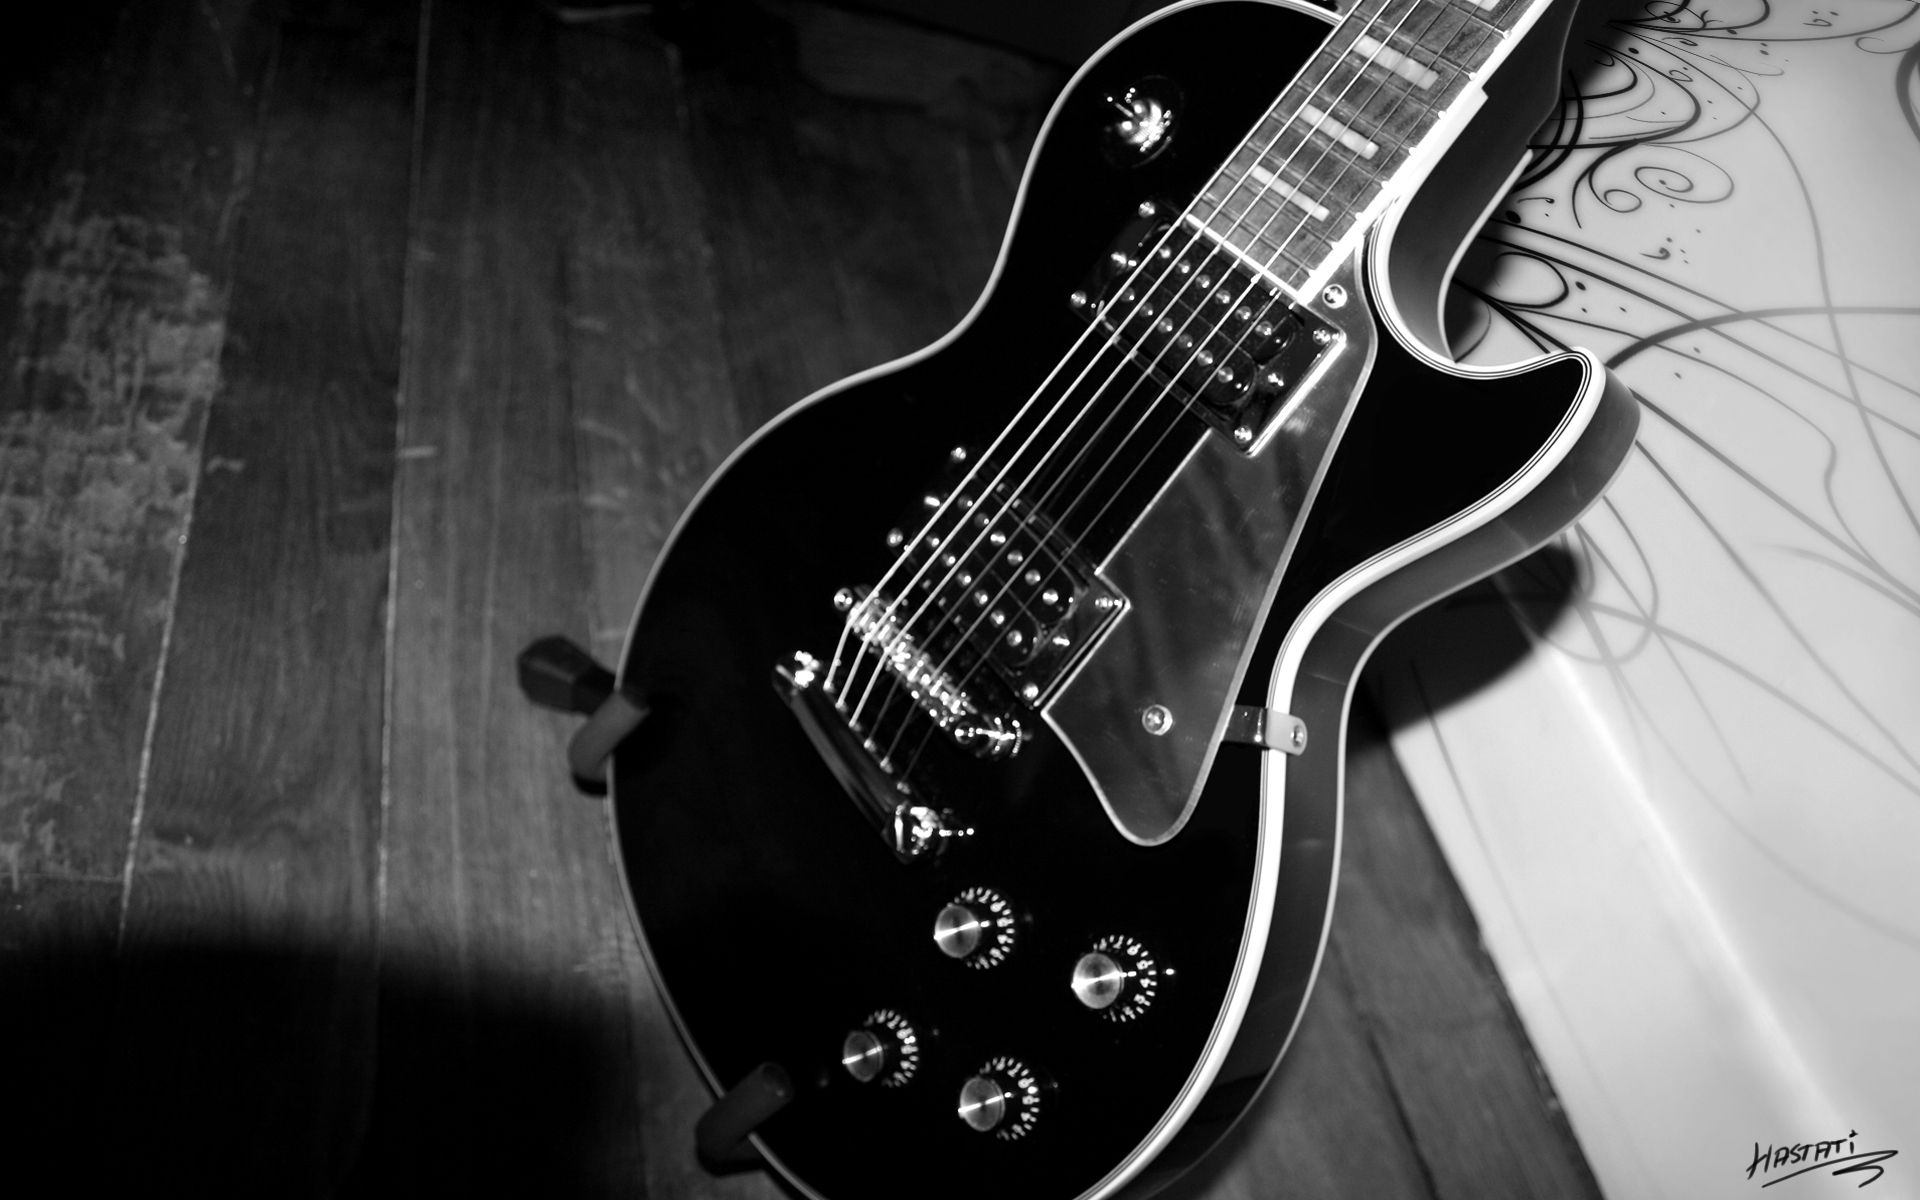 A black and white photograph of an electric guitar - Guitar